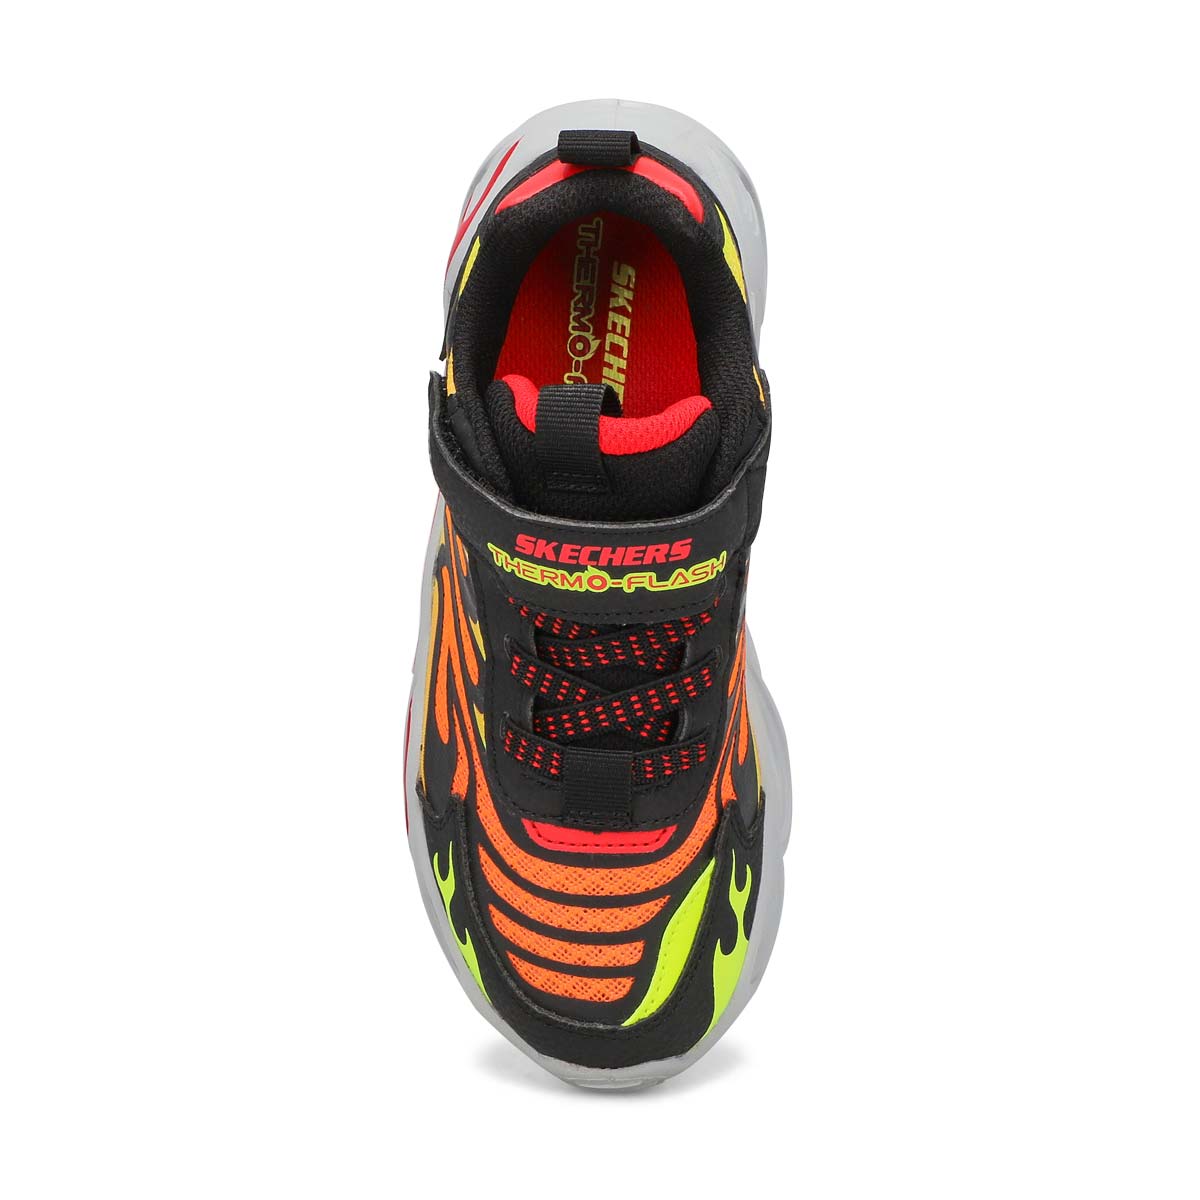 Boys' Thermo-Flash Light Up Sneakers - Black/Red